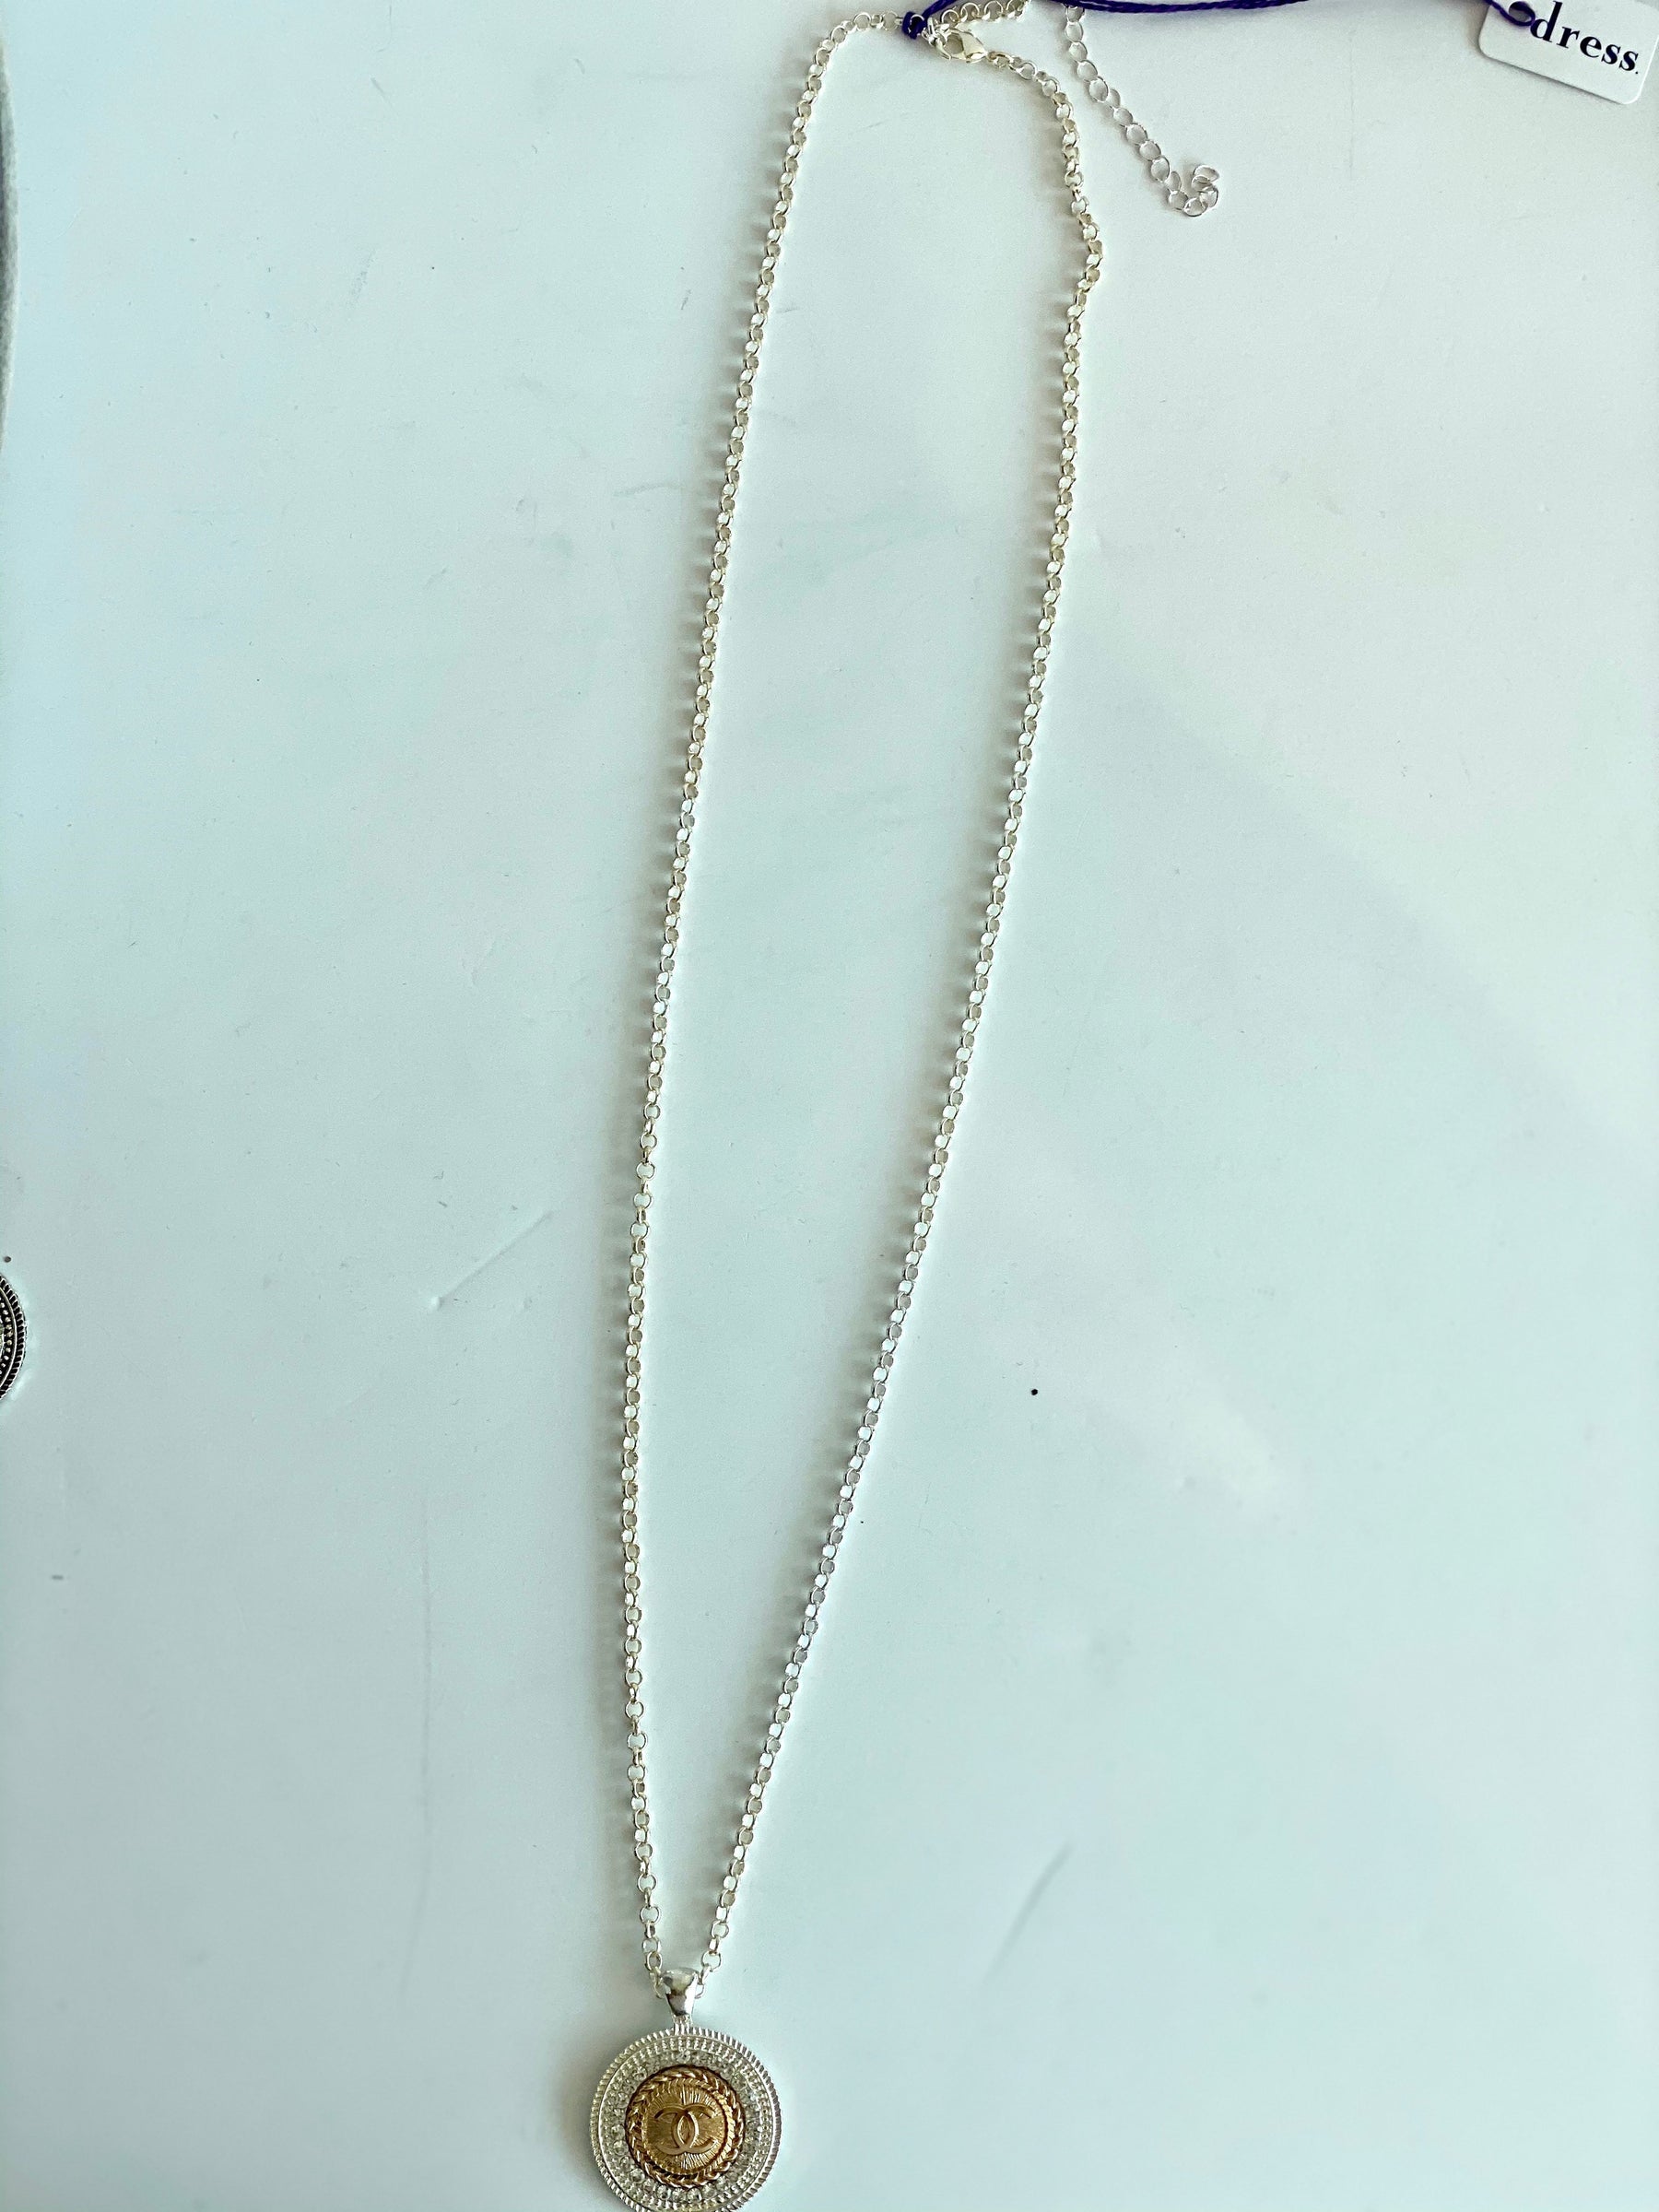 chanelbuttongoldnecklace